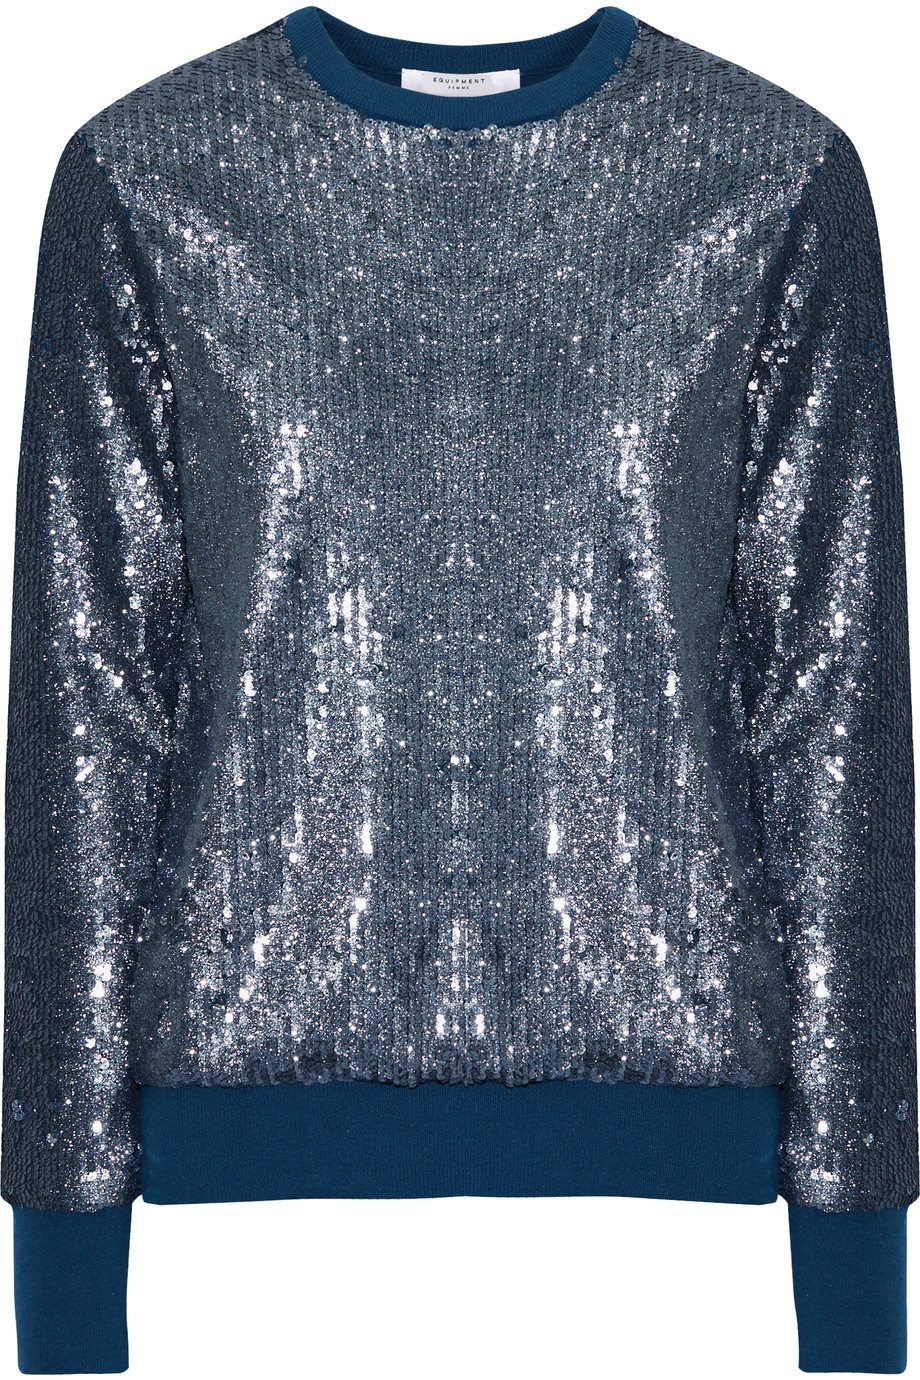 Equipment Shane Sequined Knitted Sweate